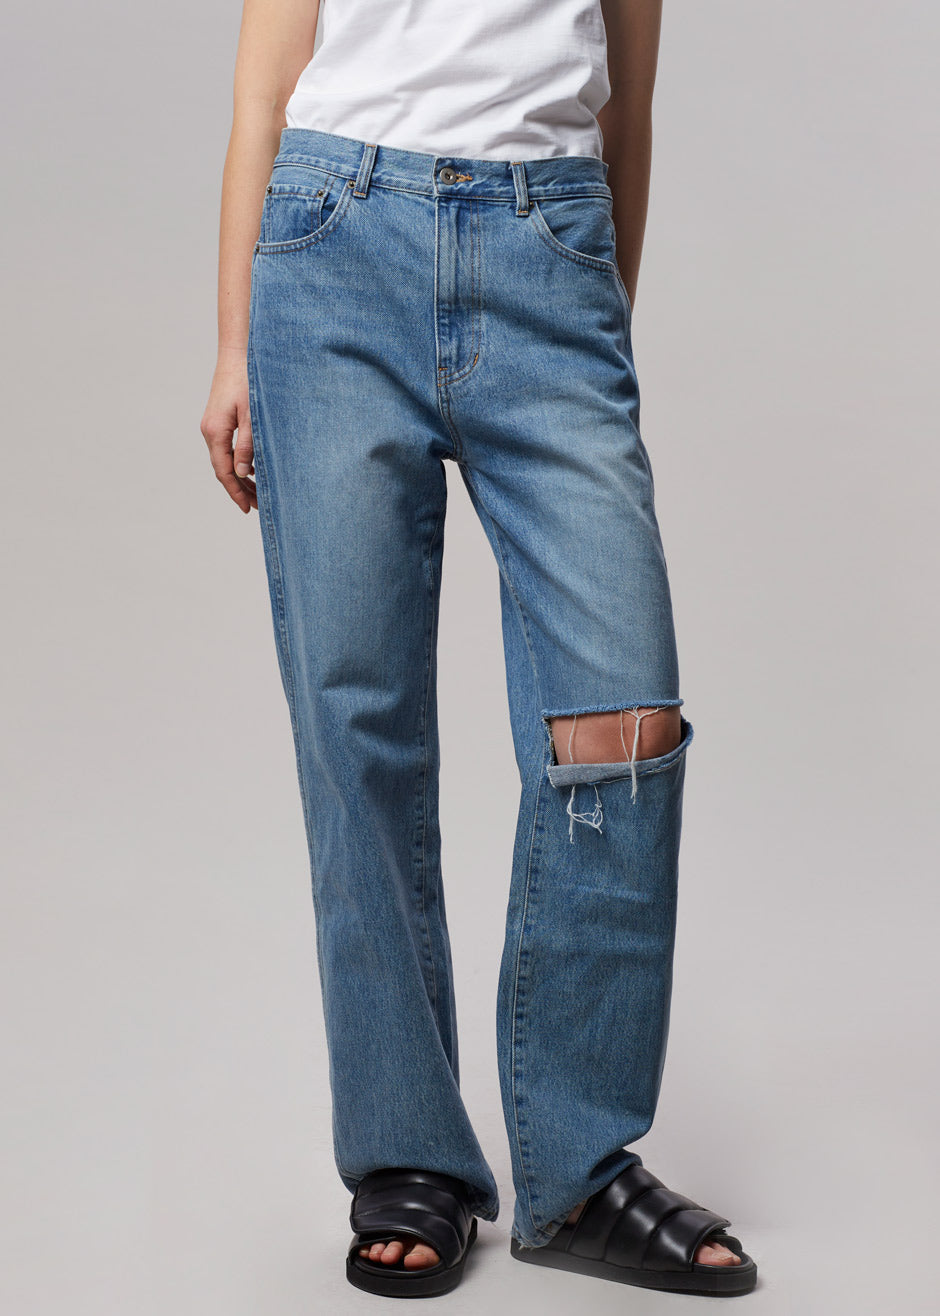 Laon Ripped Jeans - Worn Wash - 2